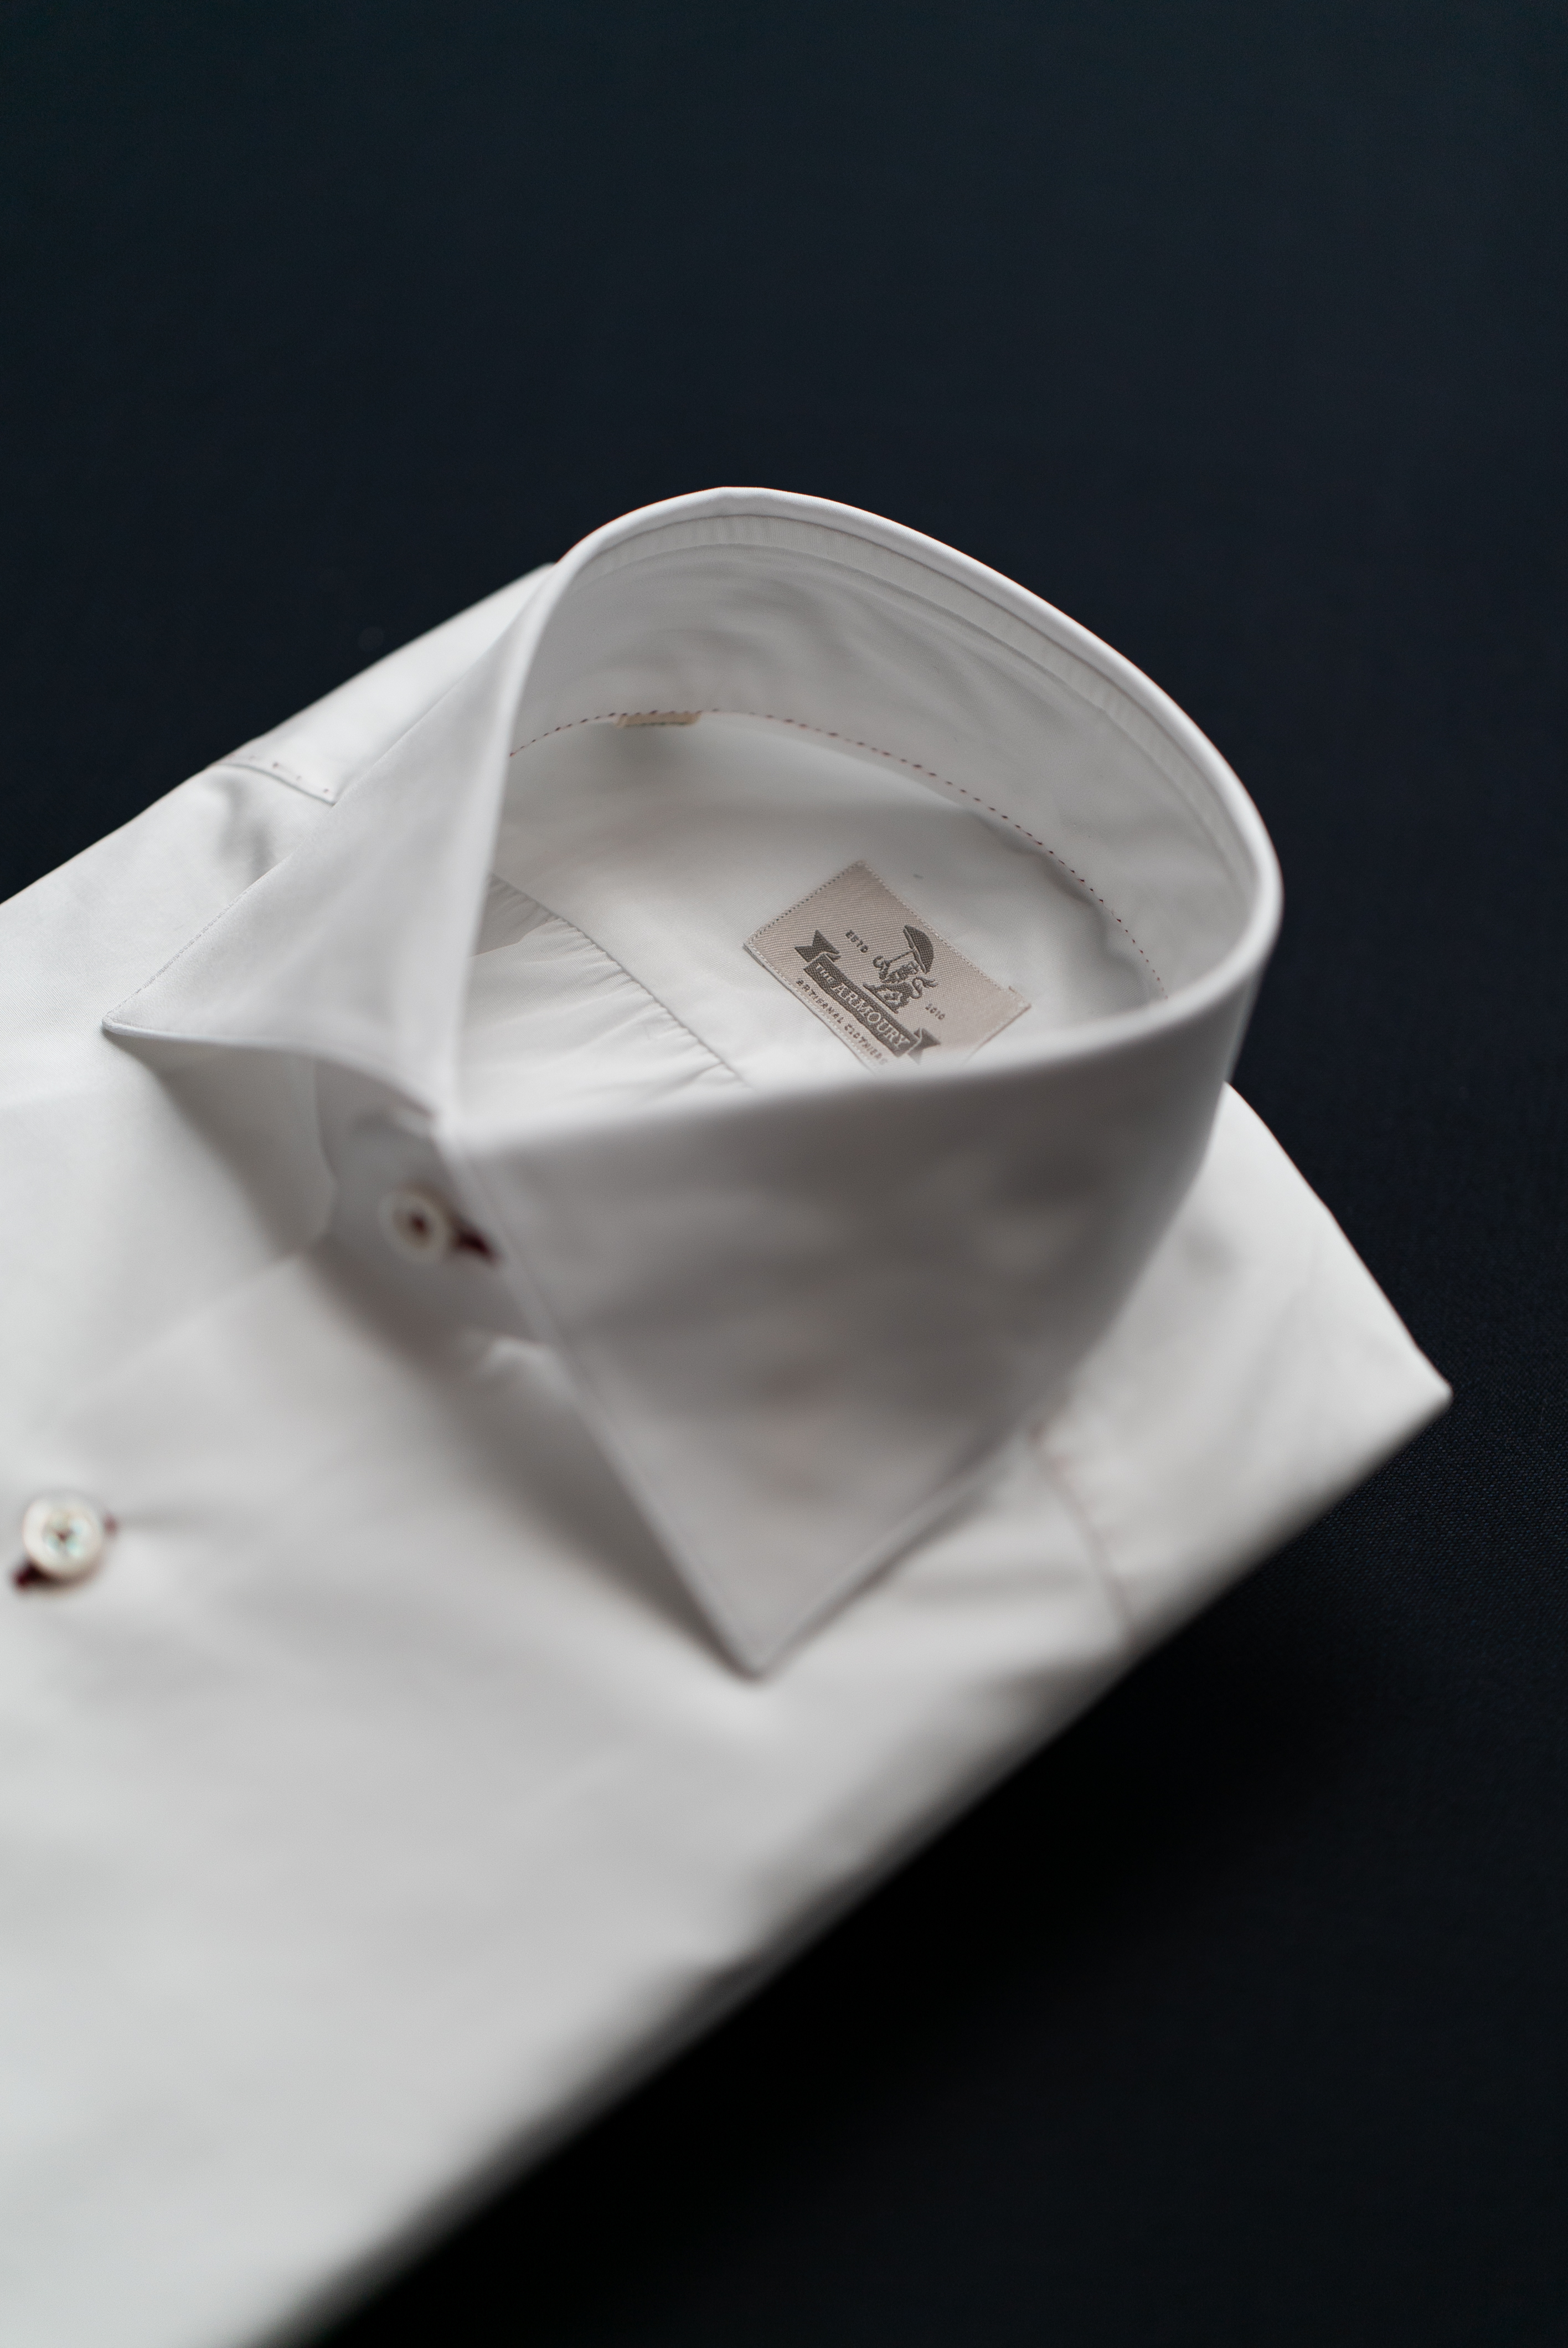 The Armoury Shirt: 11 Steps by Hand